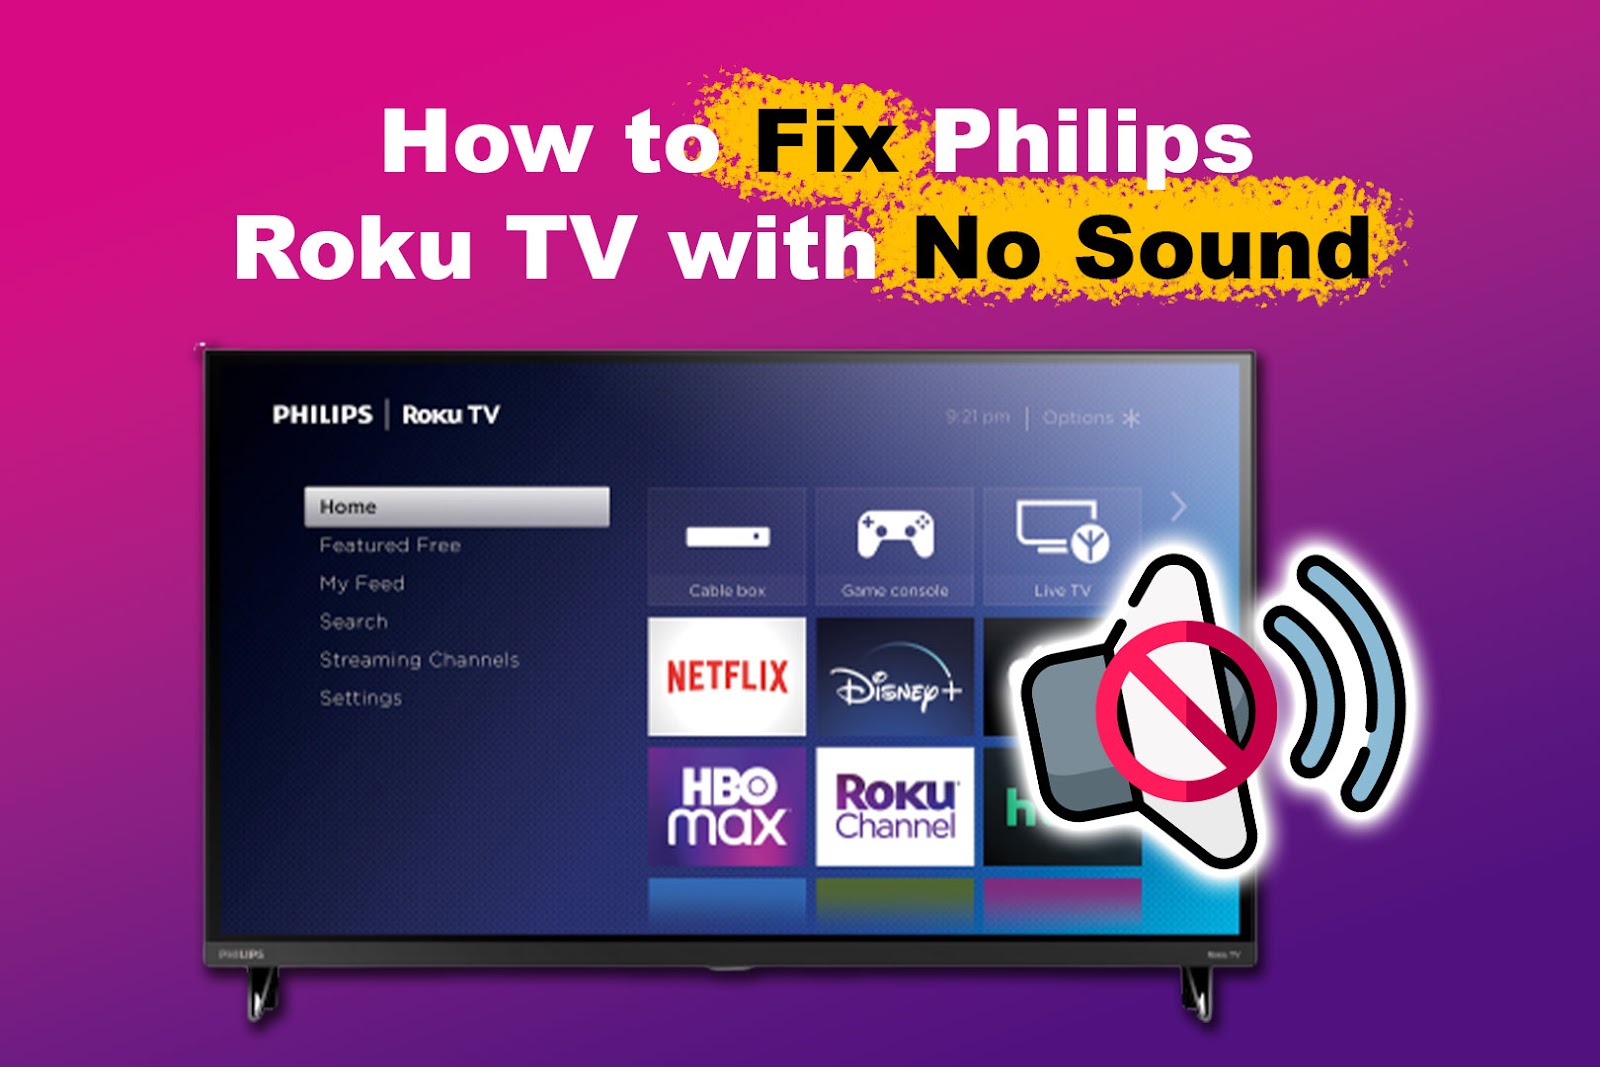 How to Fix Philips Roku TV with No Sound